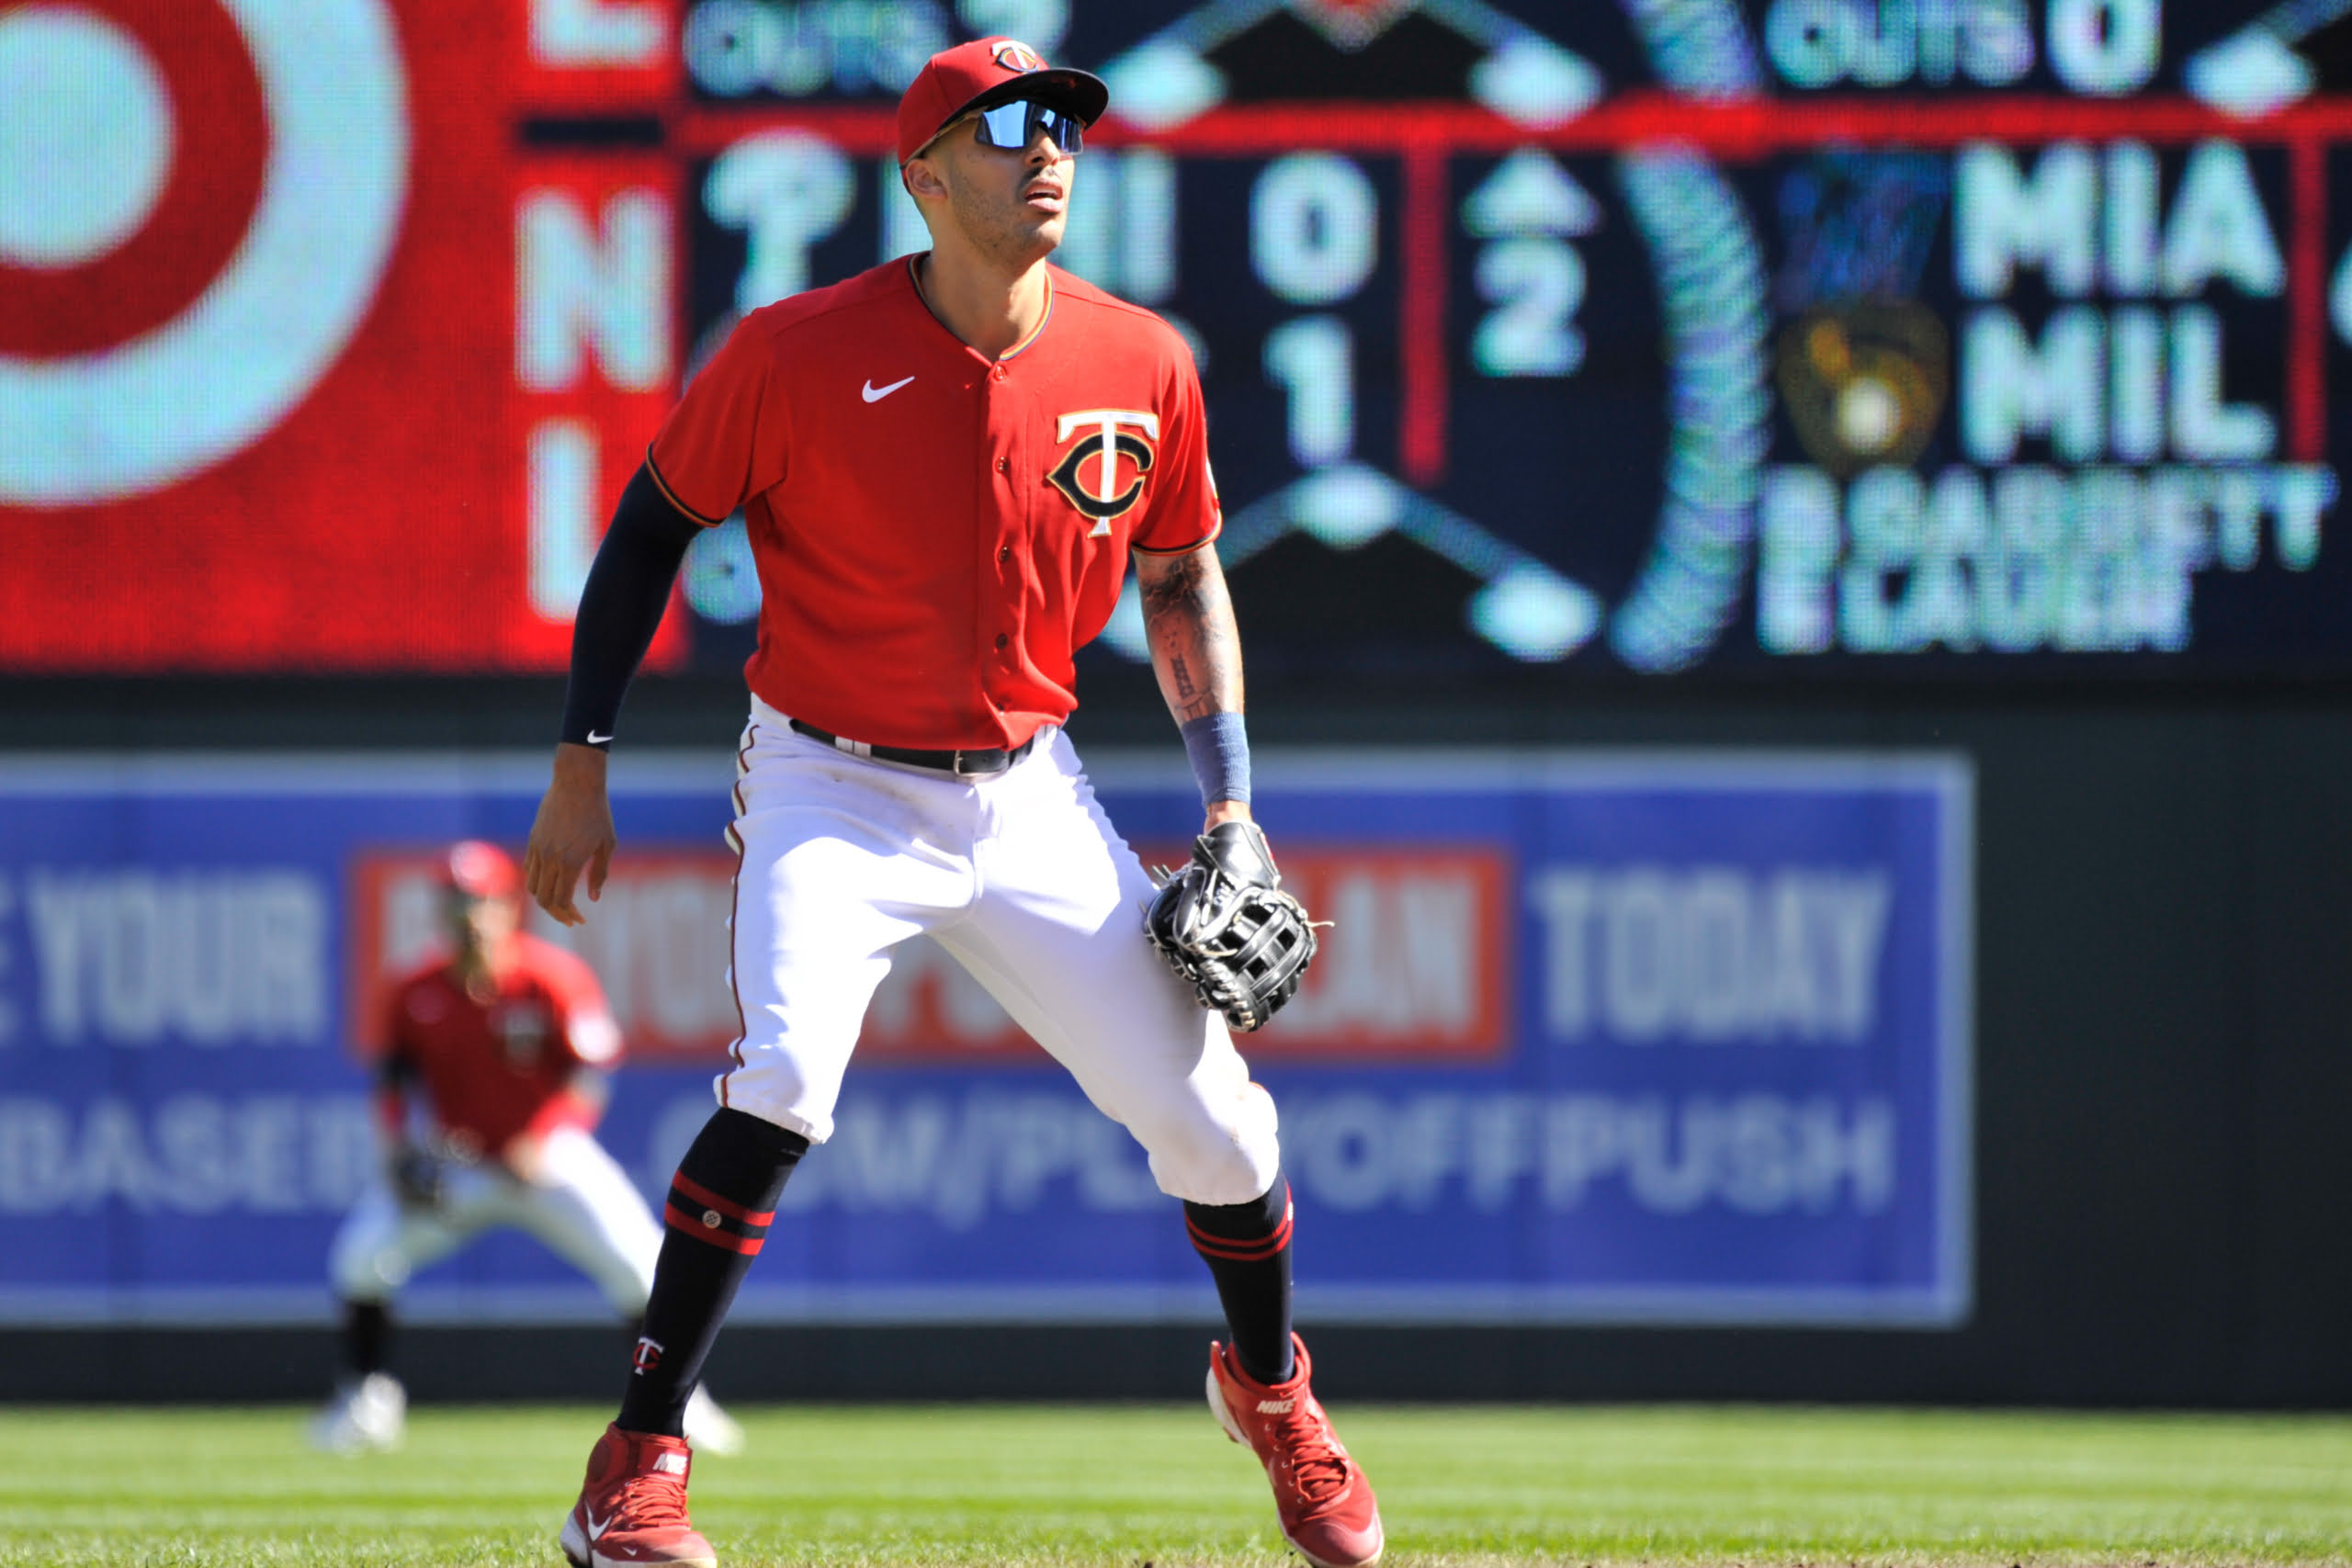 Giants signs star shortstop Carlos Correa to $350 million contract 